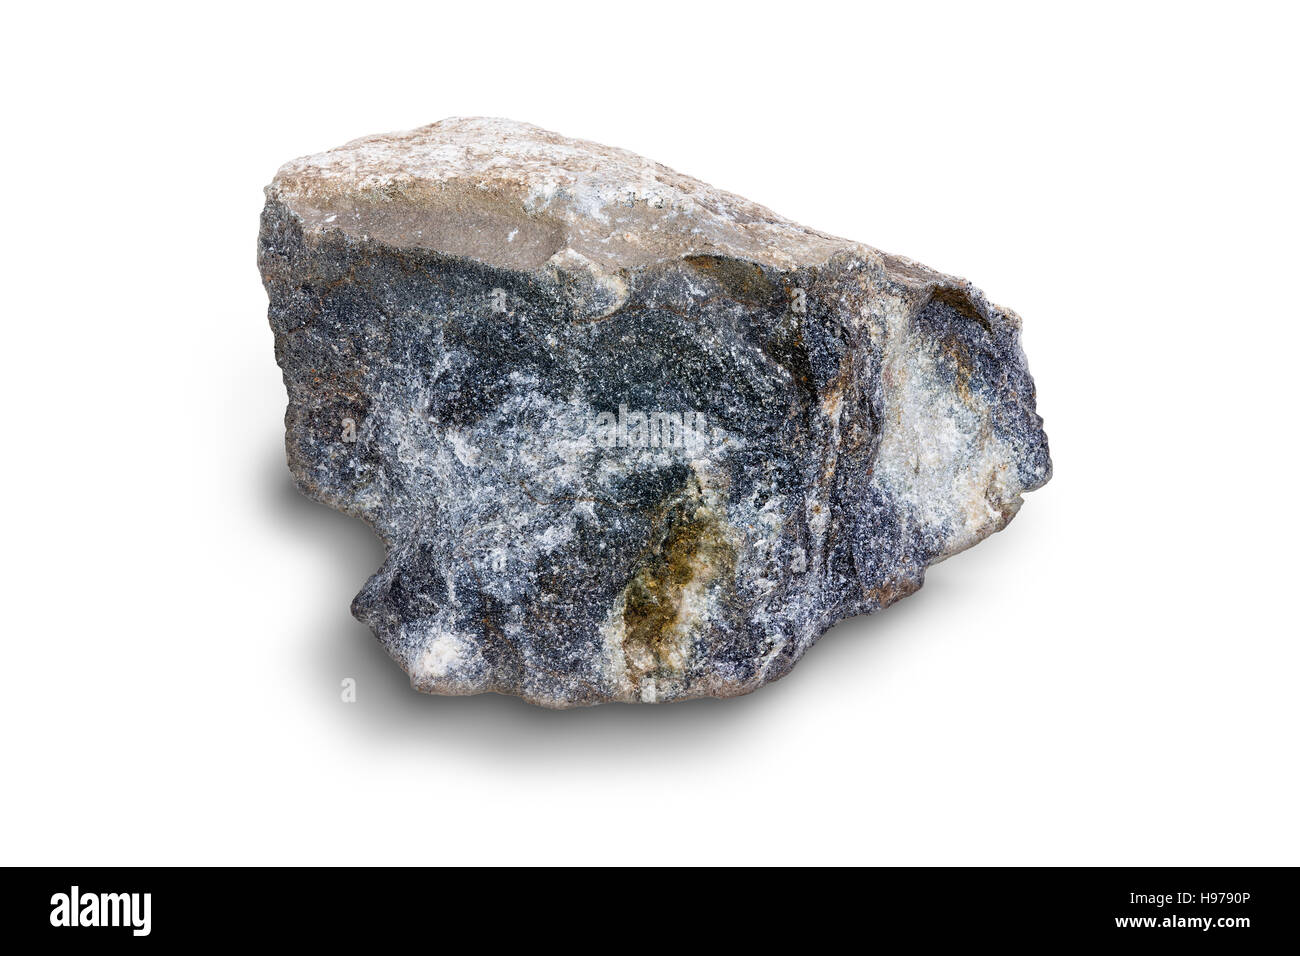 Piece of broken fractured igneous rock on white showing the texture of the stone in a concept of natural resources and geology Stock Photo